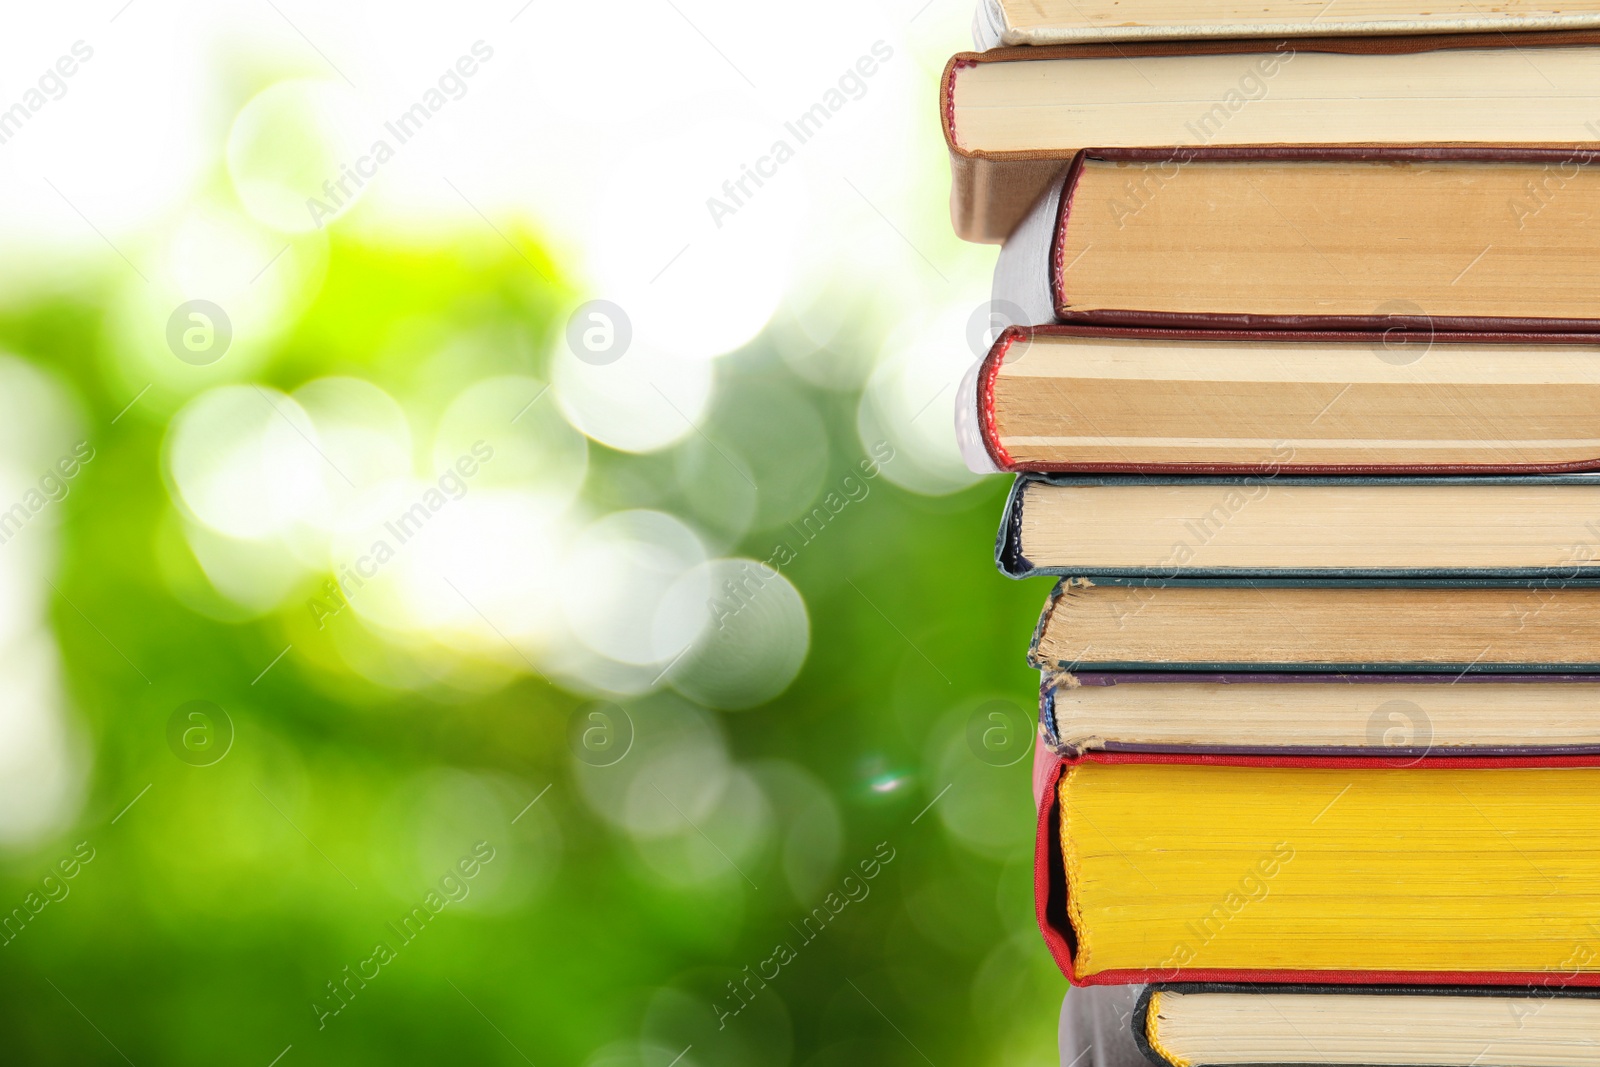 Image of Collection of different books against blurred green background, space for text